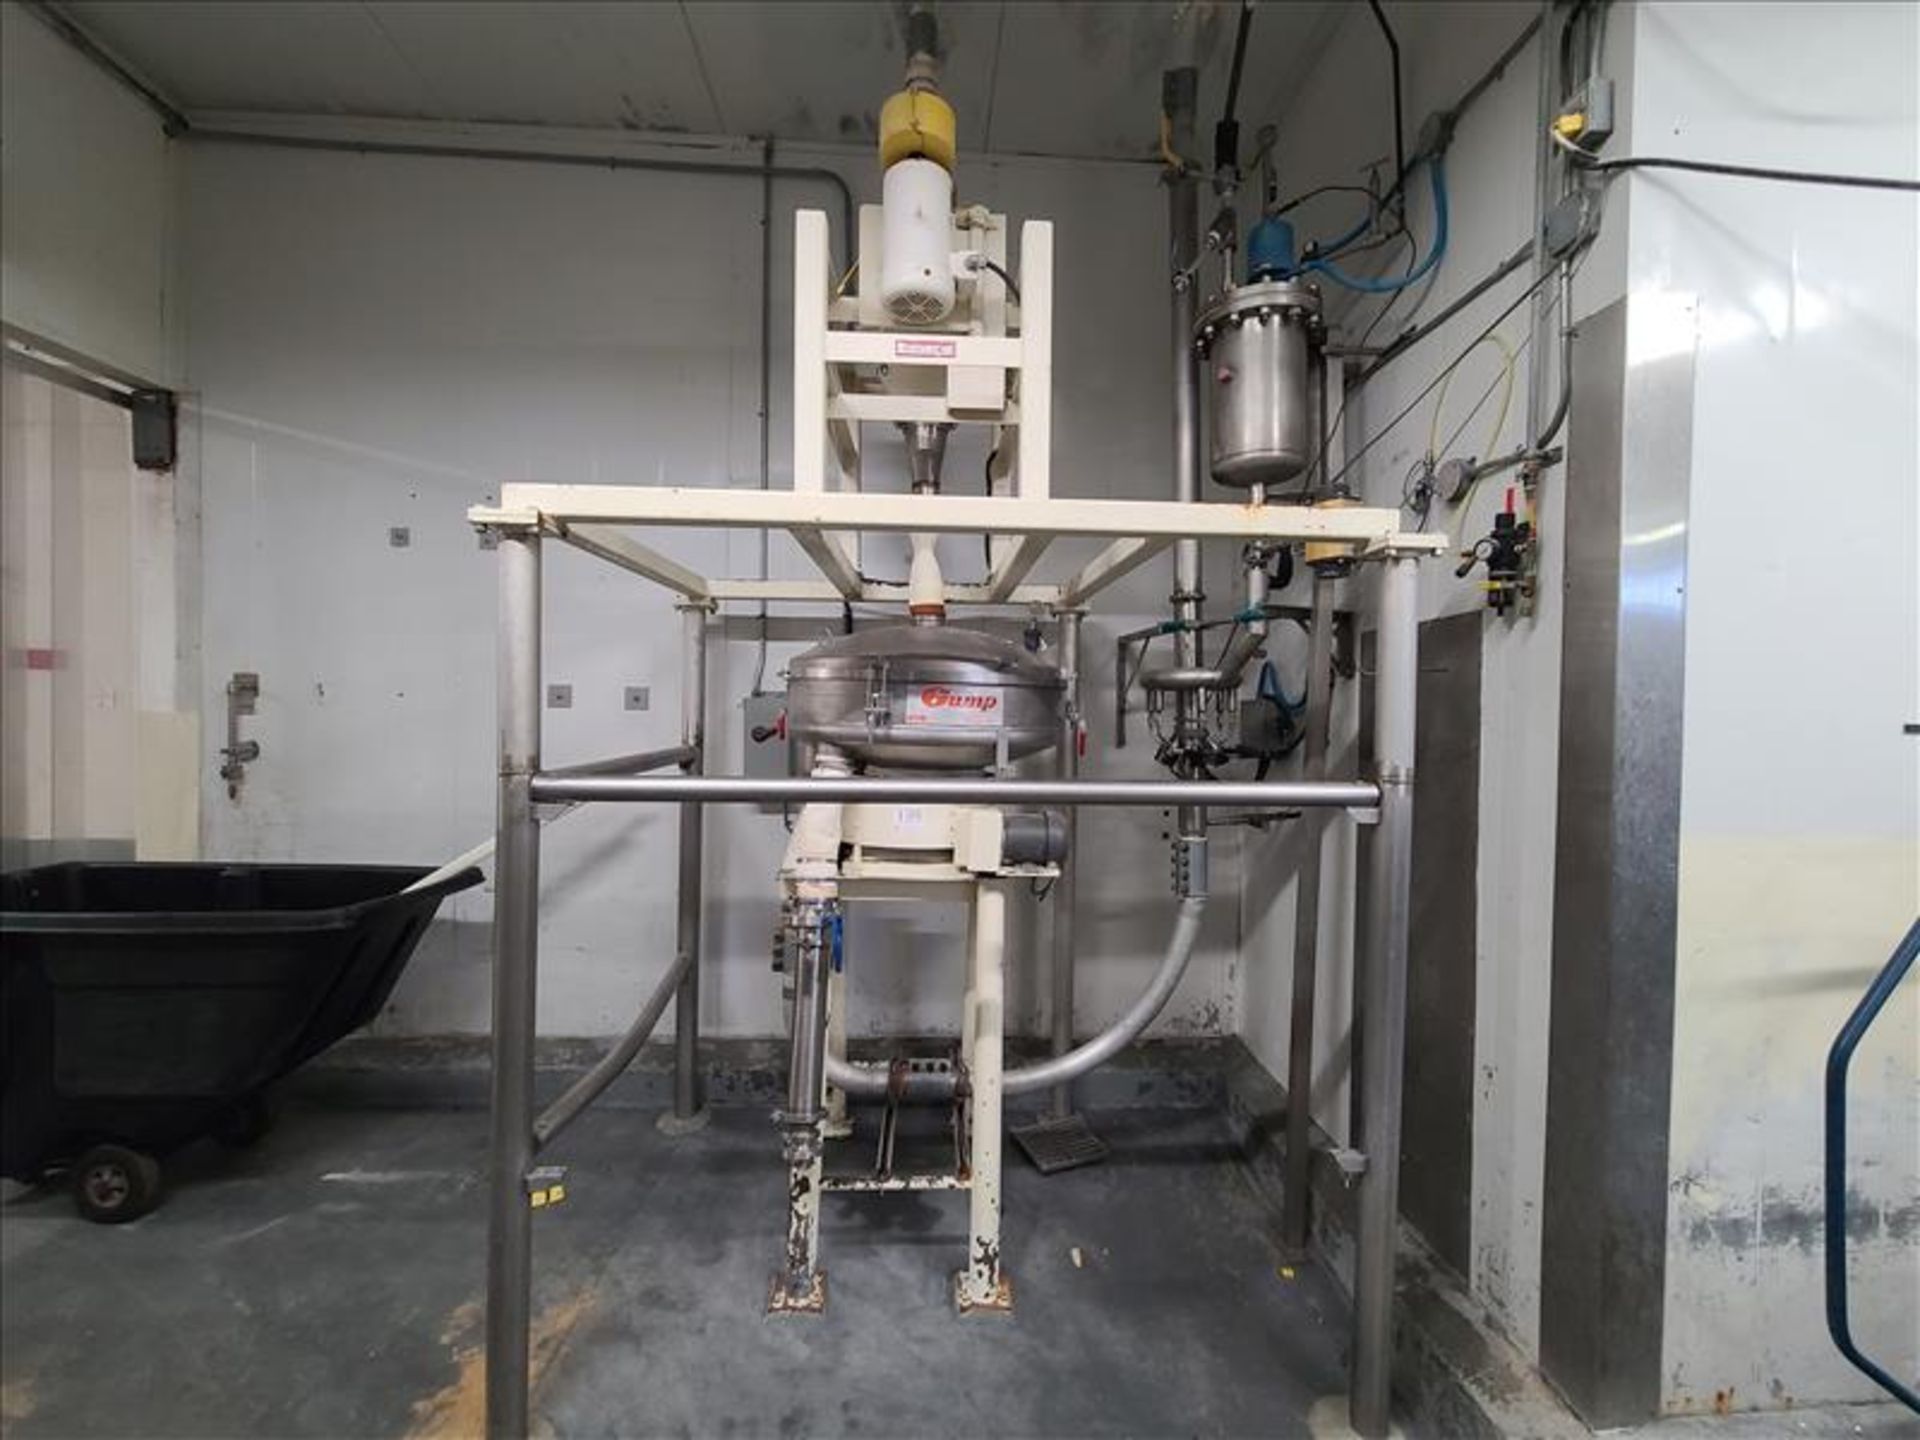 Gump Stainless Steel Pressure Sifter model CP-32, S/N C0PV3370, c/w Nitrogen Injector